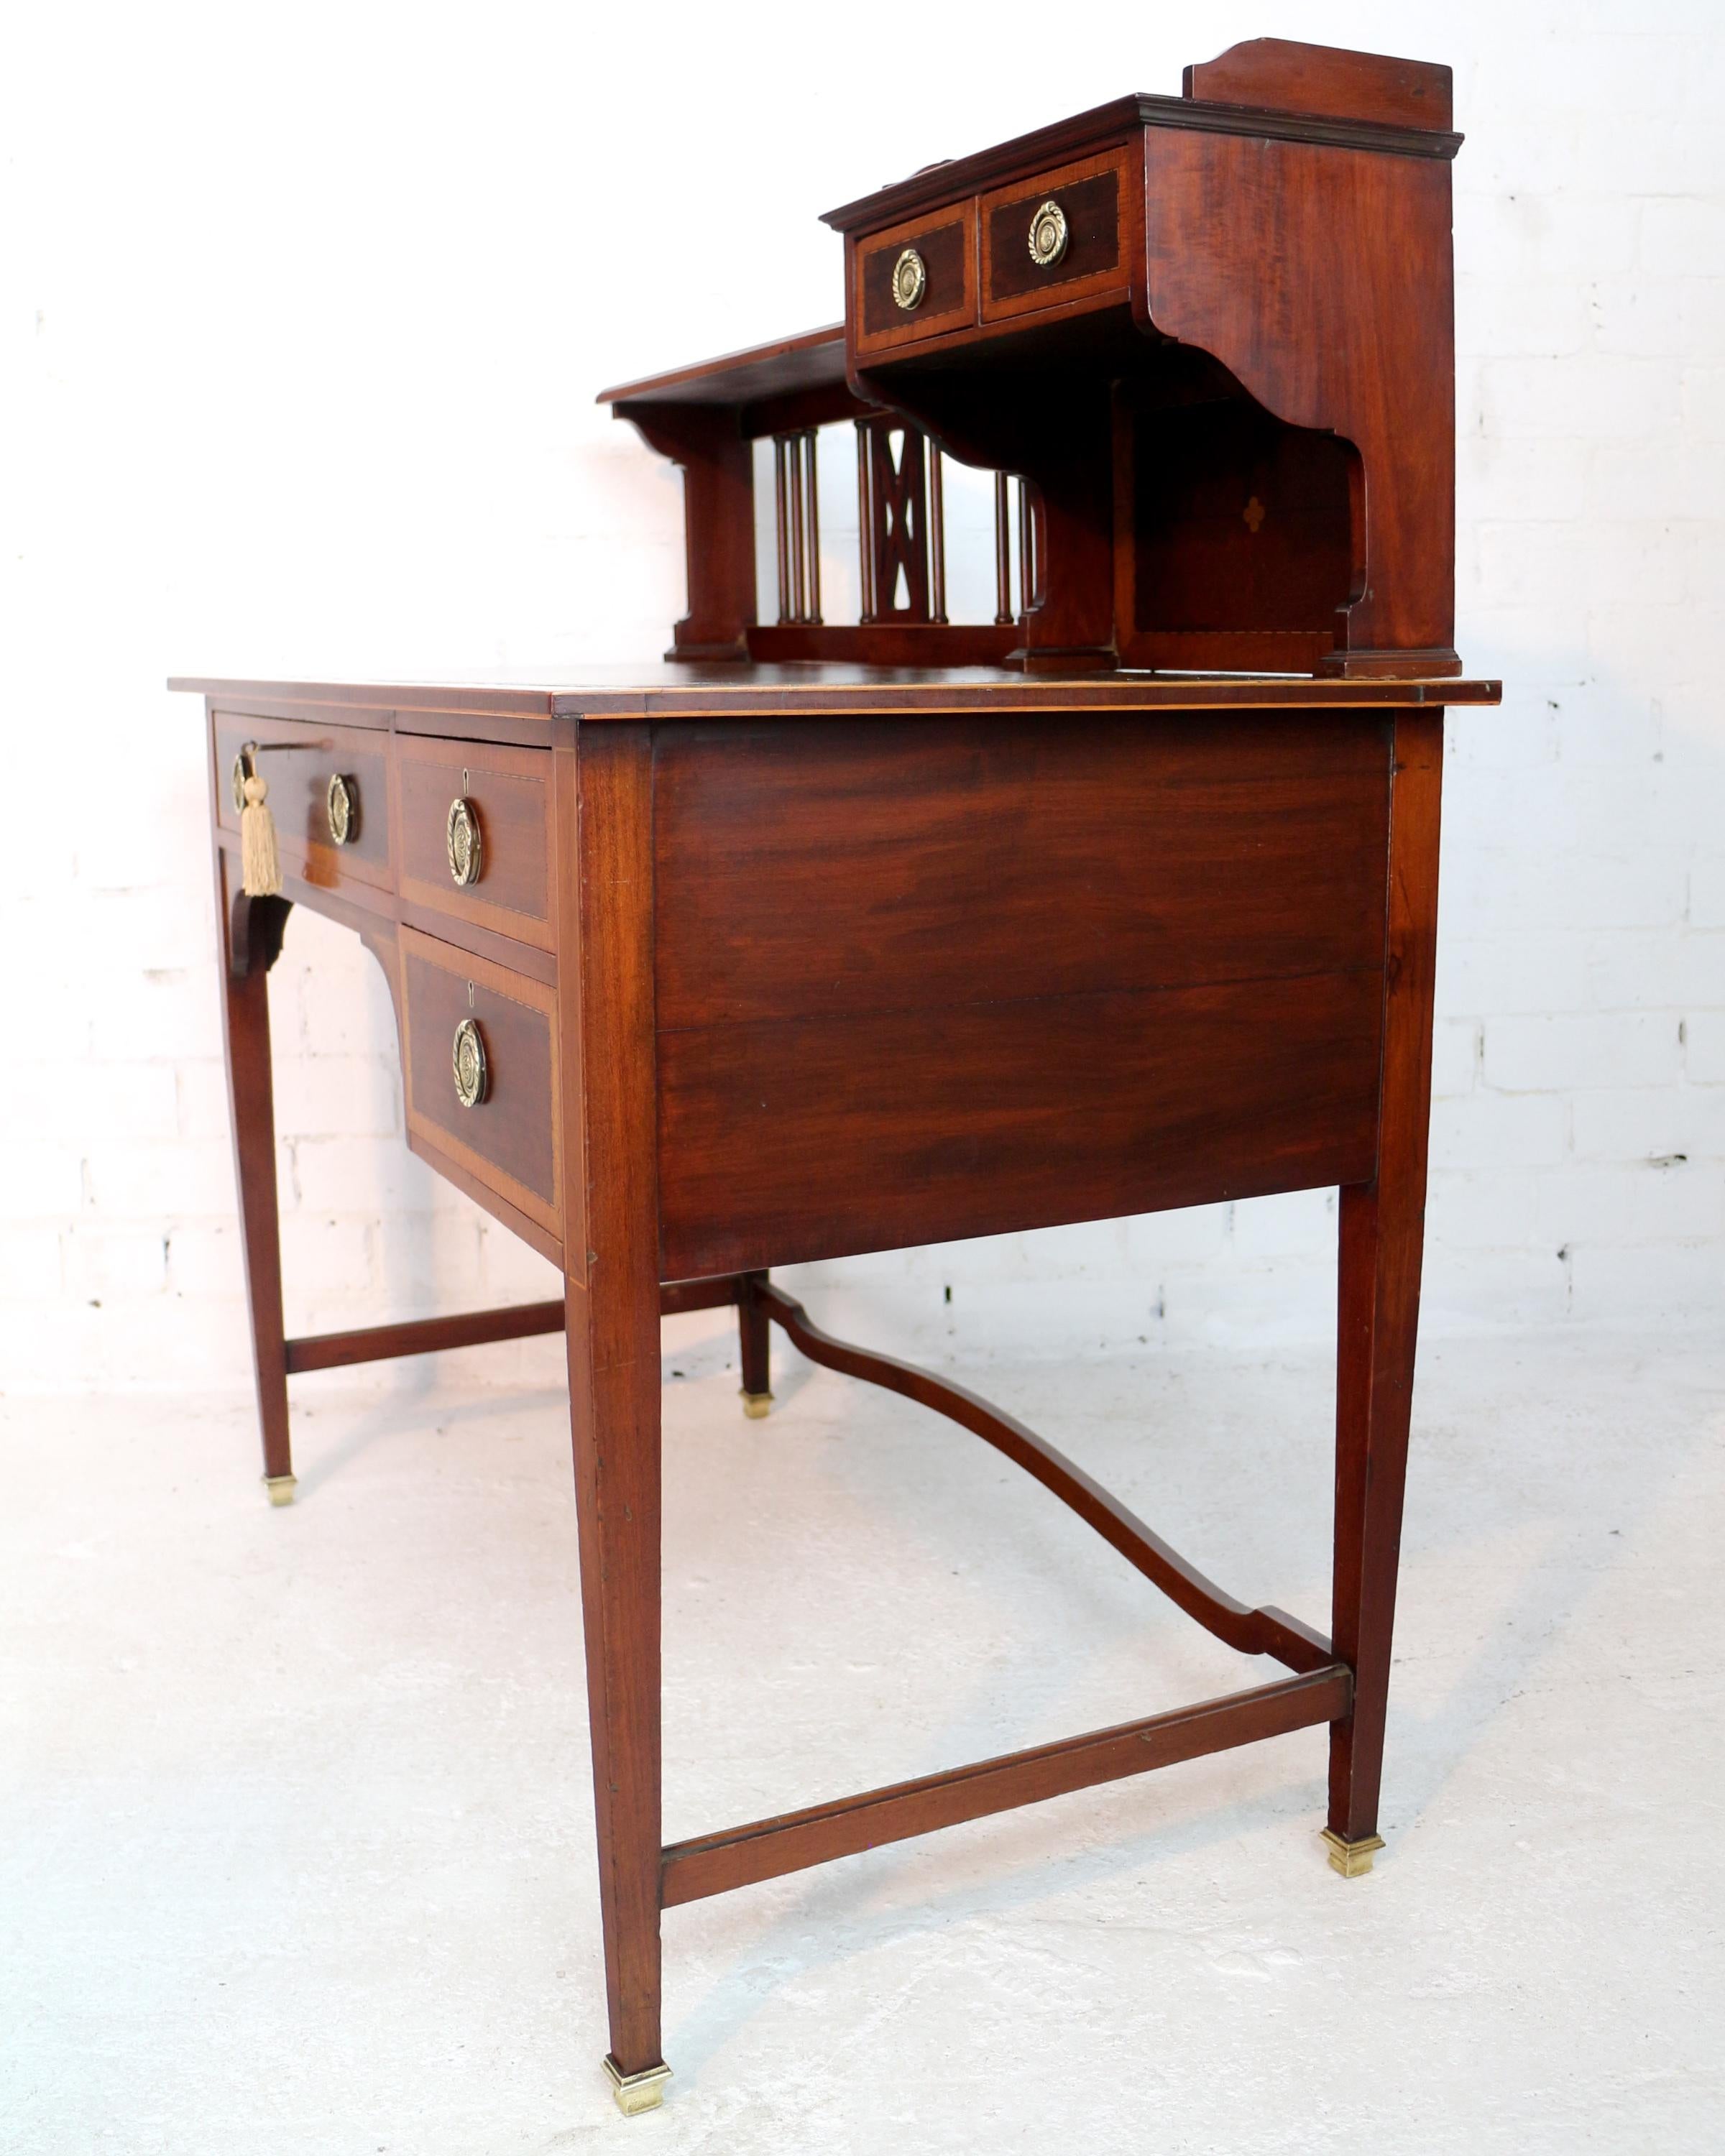 Sheraton Revival Mahogany and Inlaid Desk, Attributed to Shapland & Petter 13